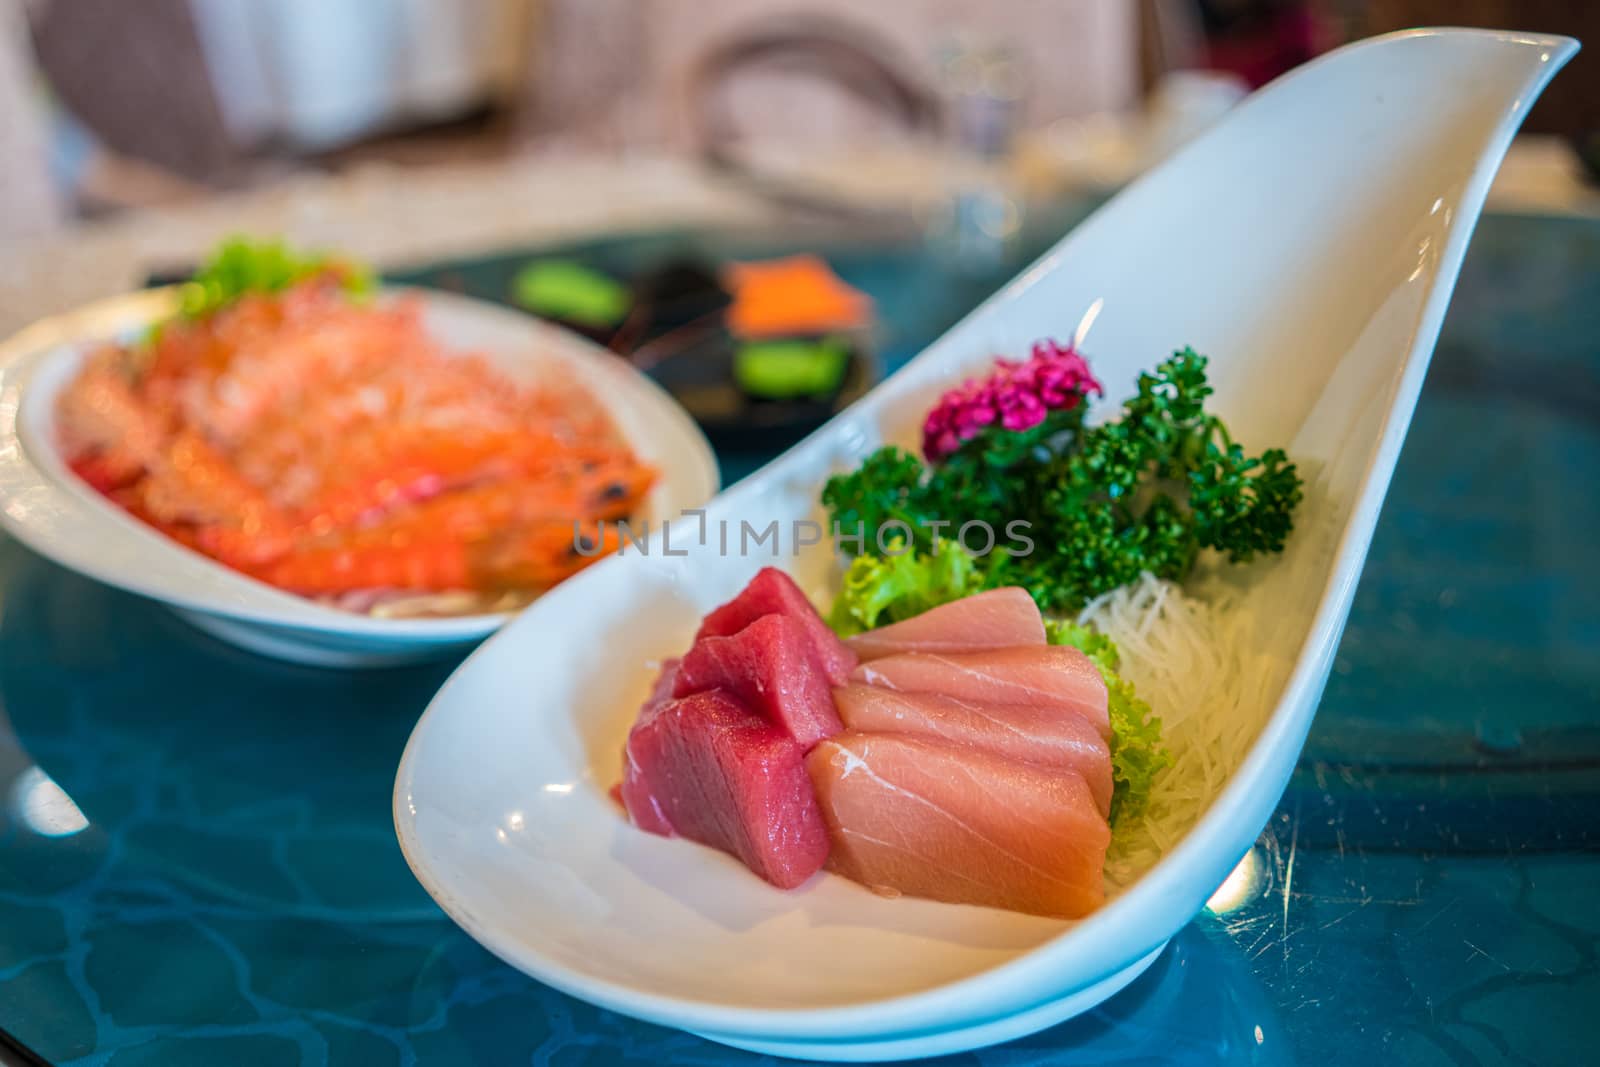 A plate of tuna and salmond sashimi served in a Japanese restaurant